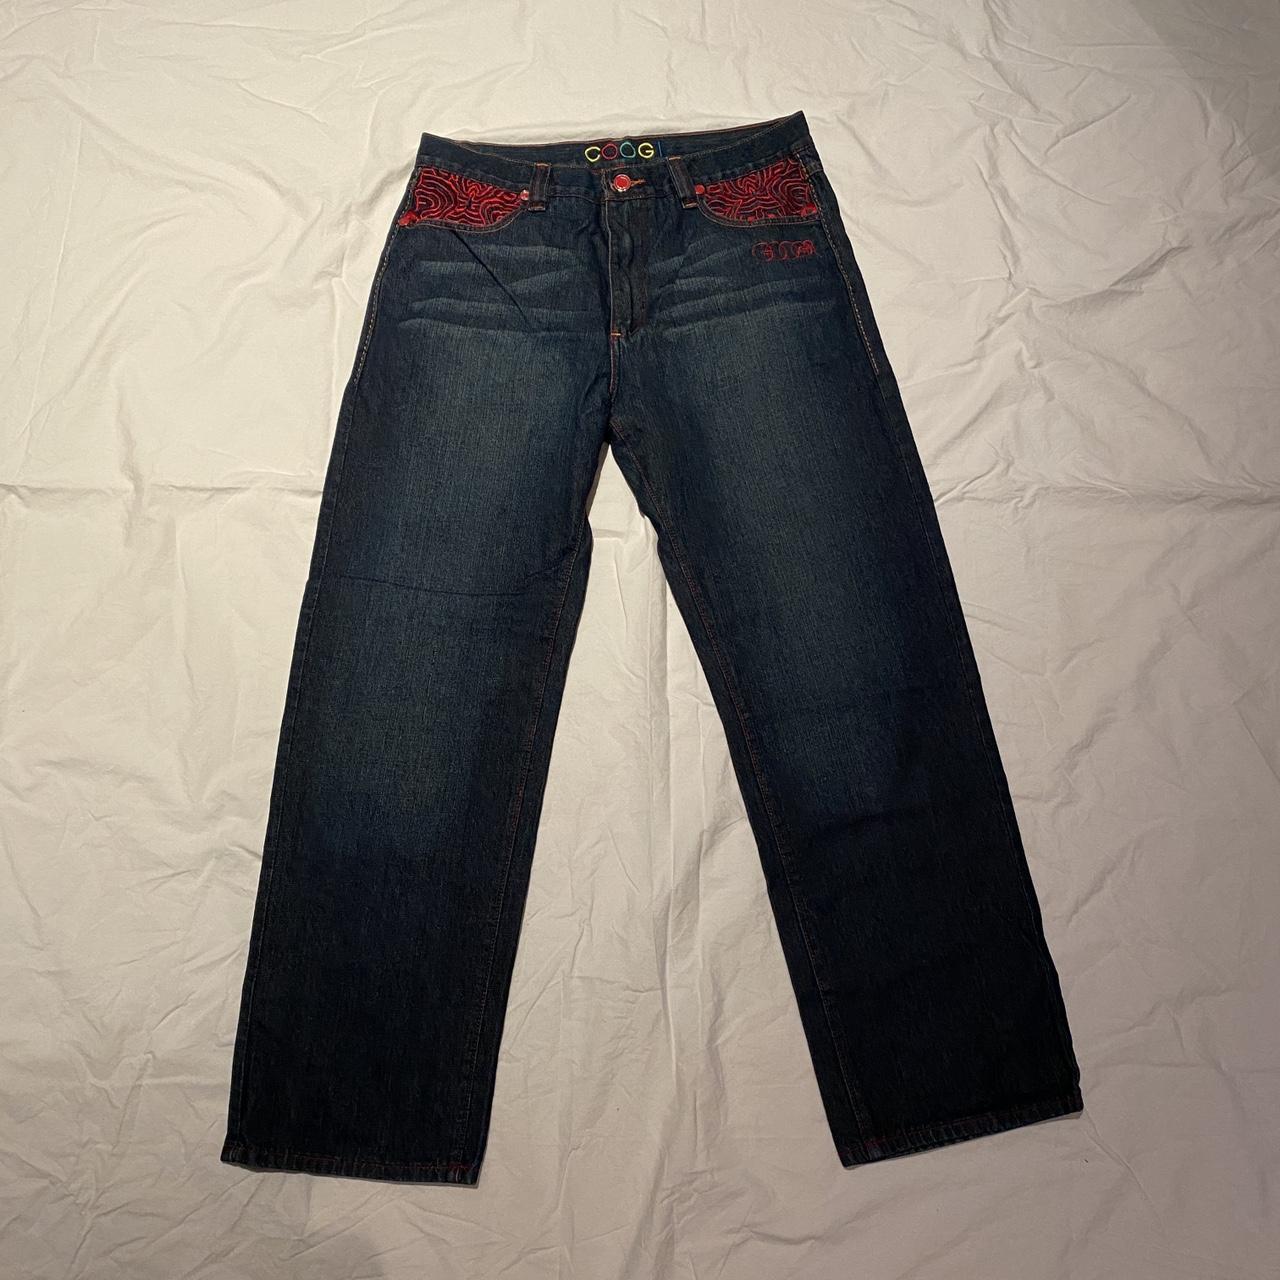 Coogi Men's Blue and Red Jeans (2)